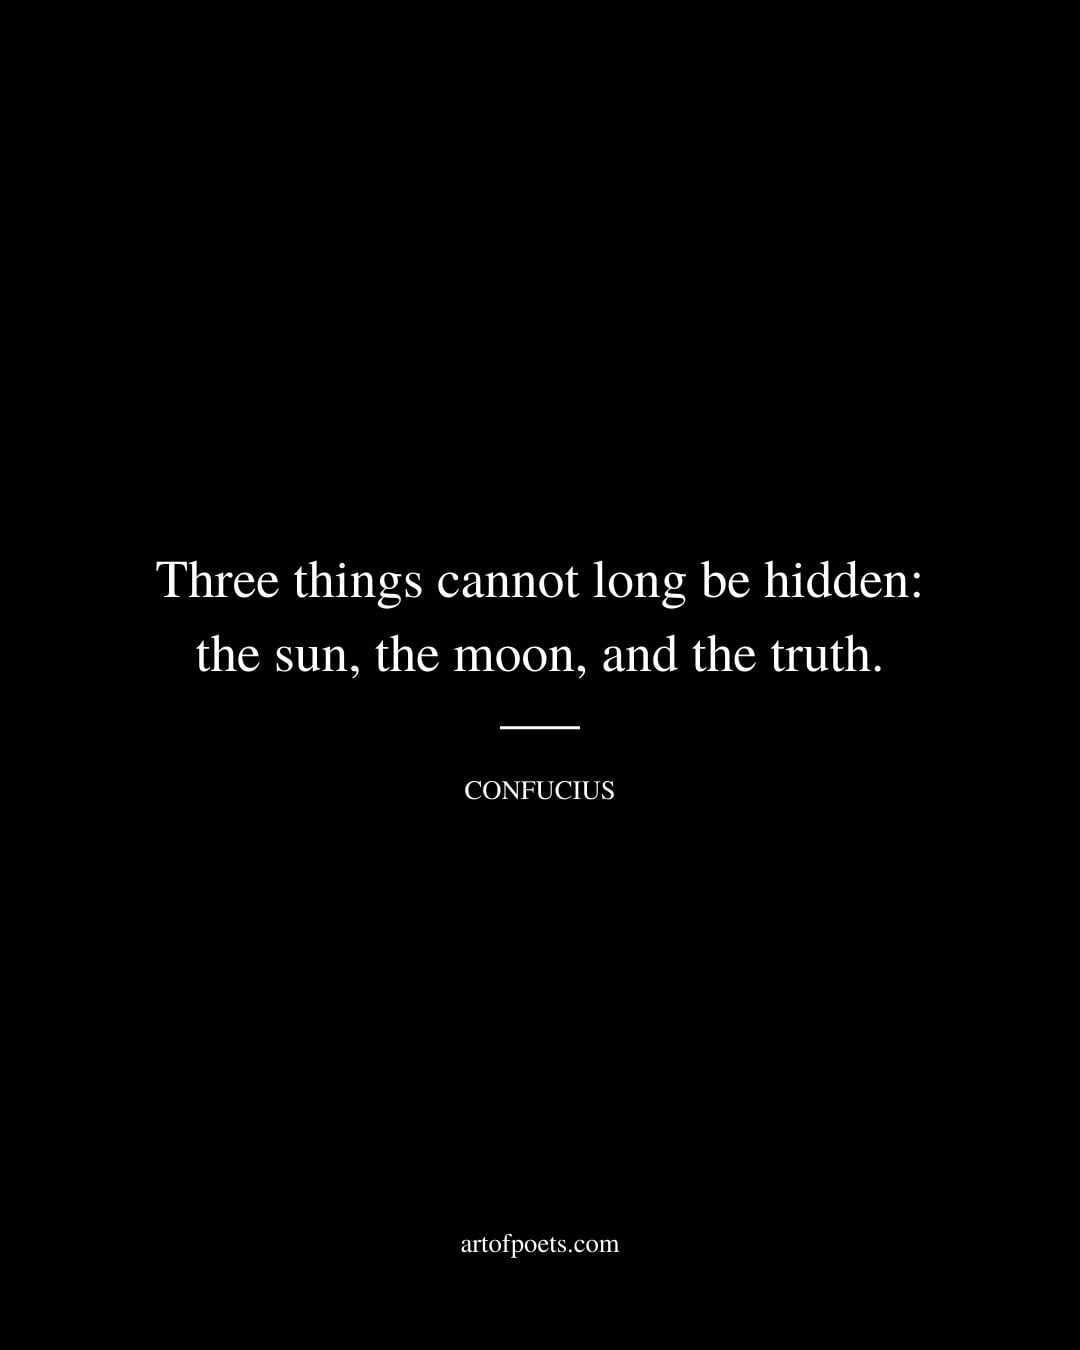 Three things cannot long be hidden the sun the moon and the truth